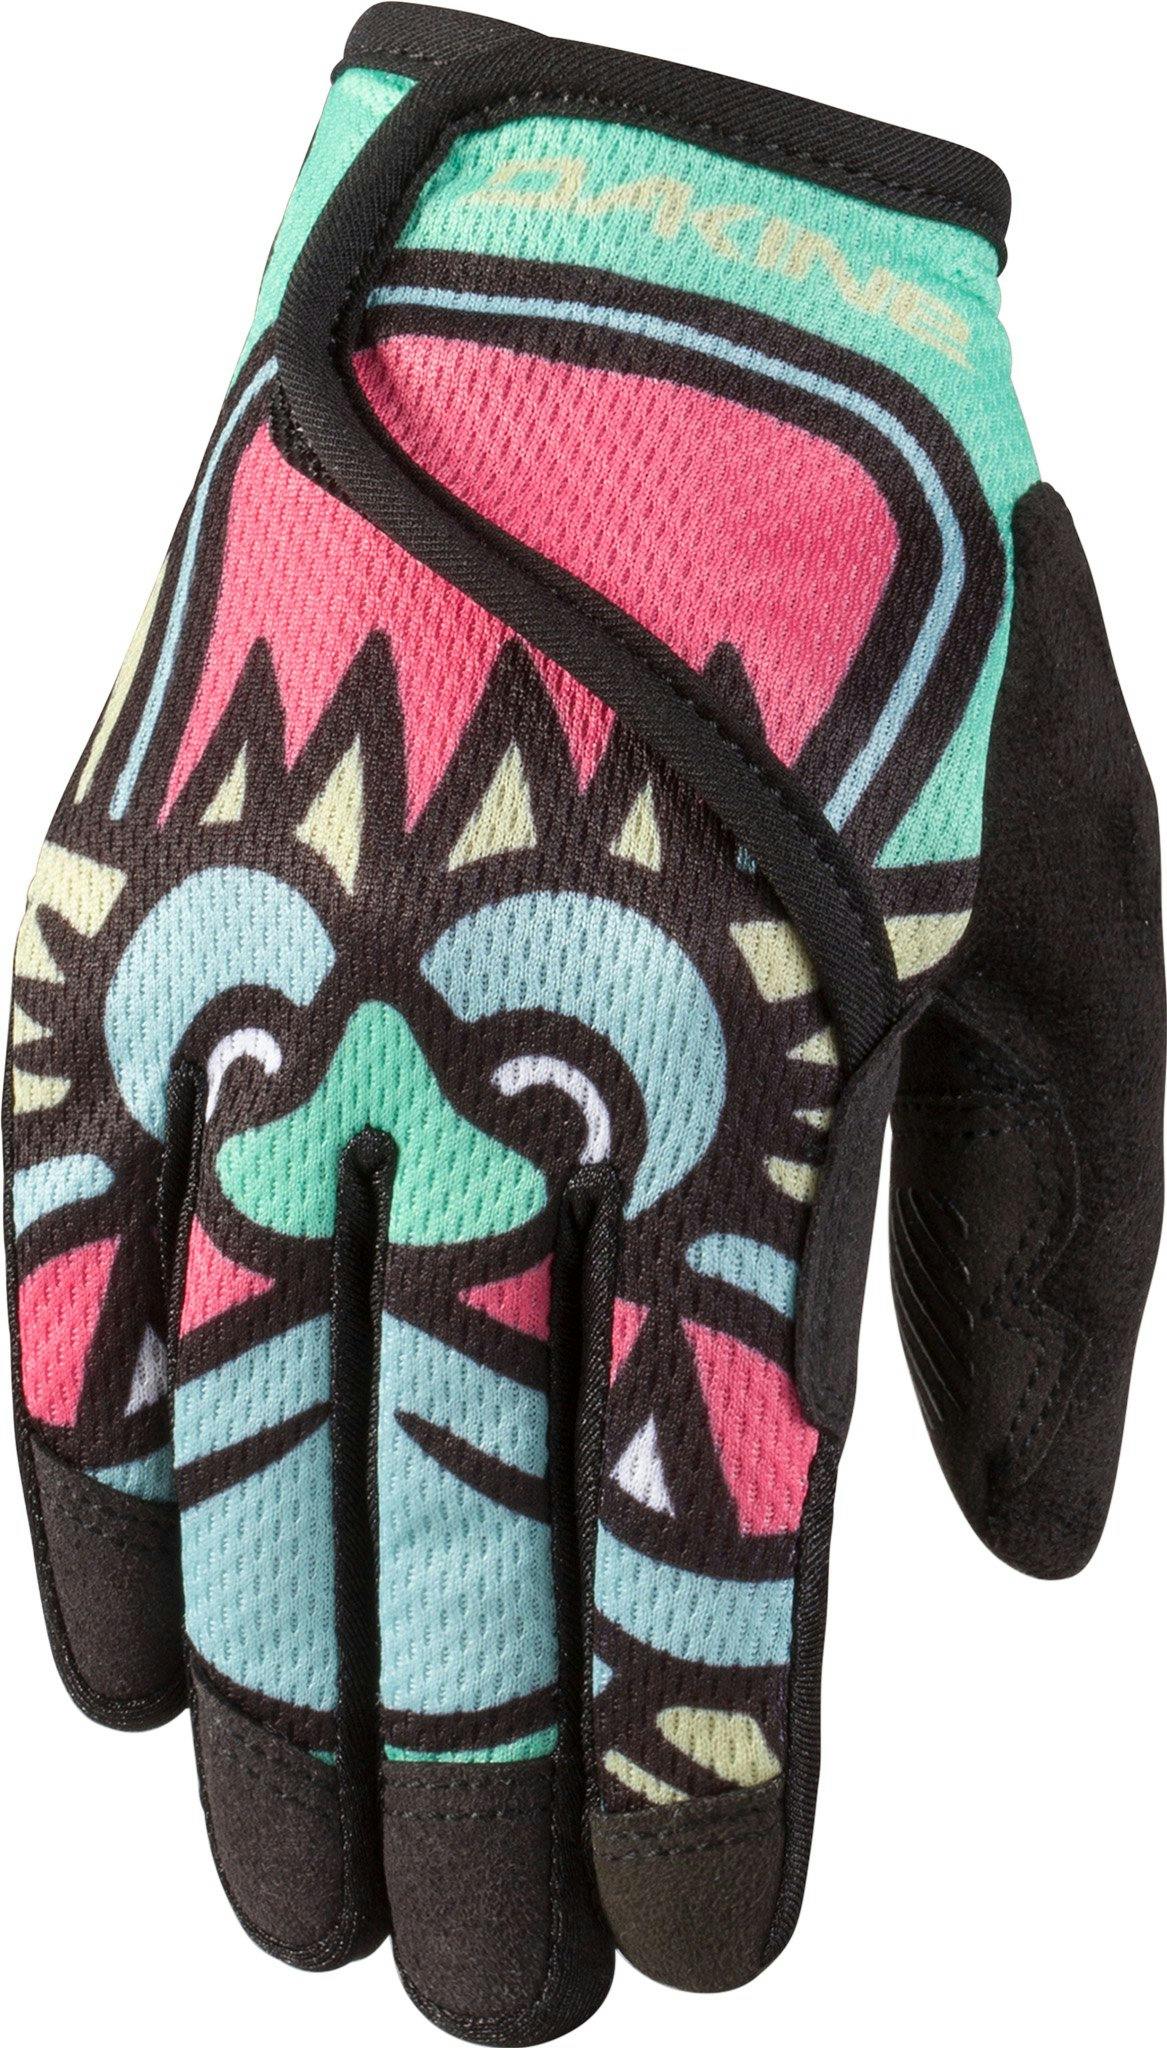 Product image for Kid's Prodigy Gloves - Kids